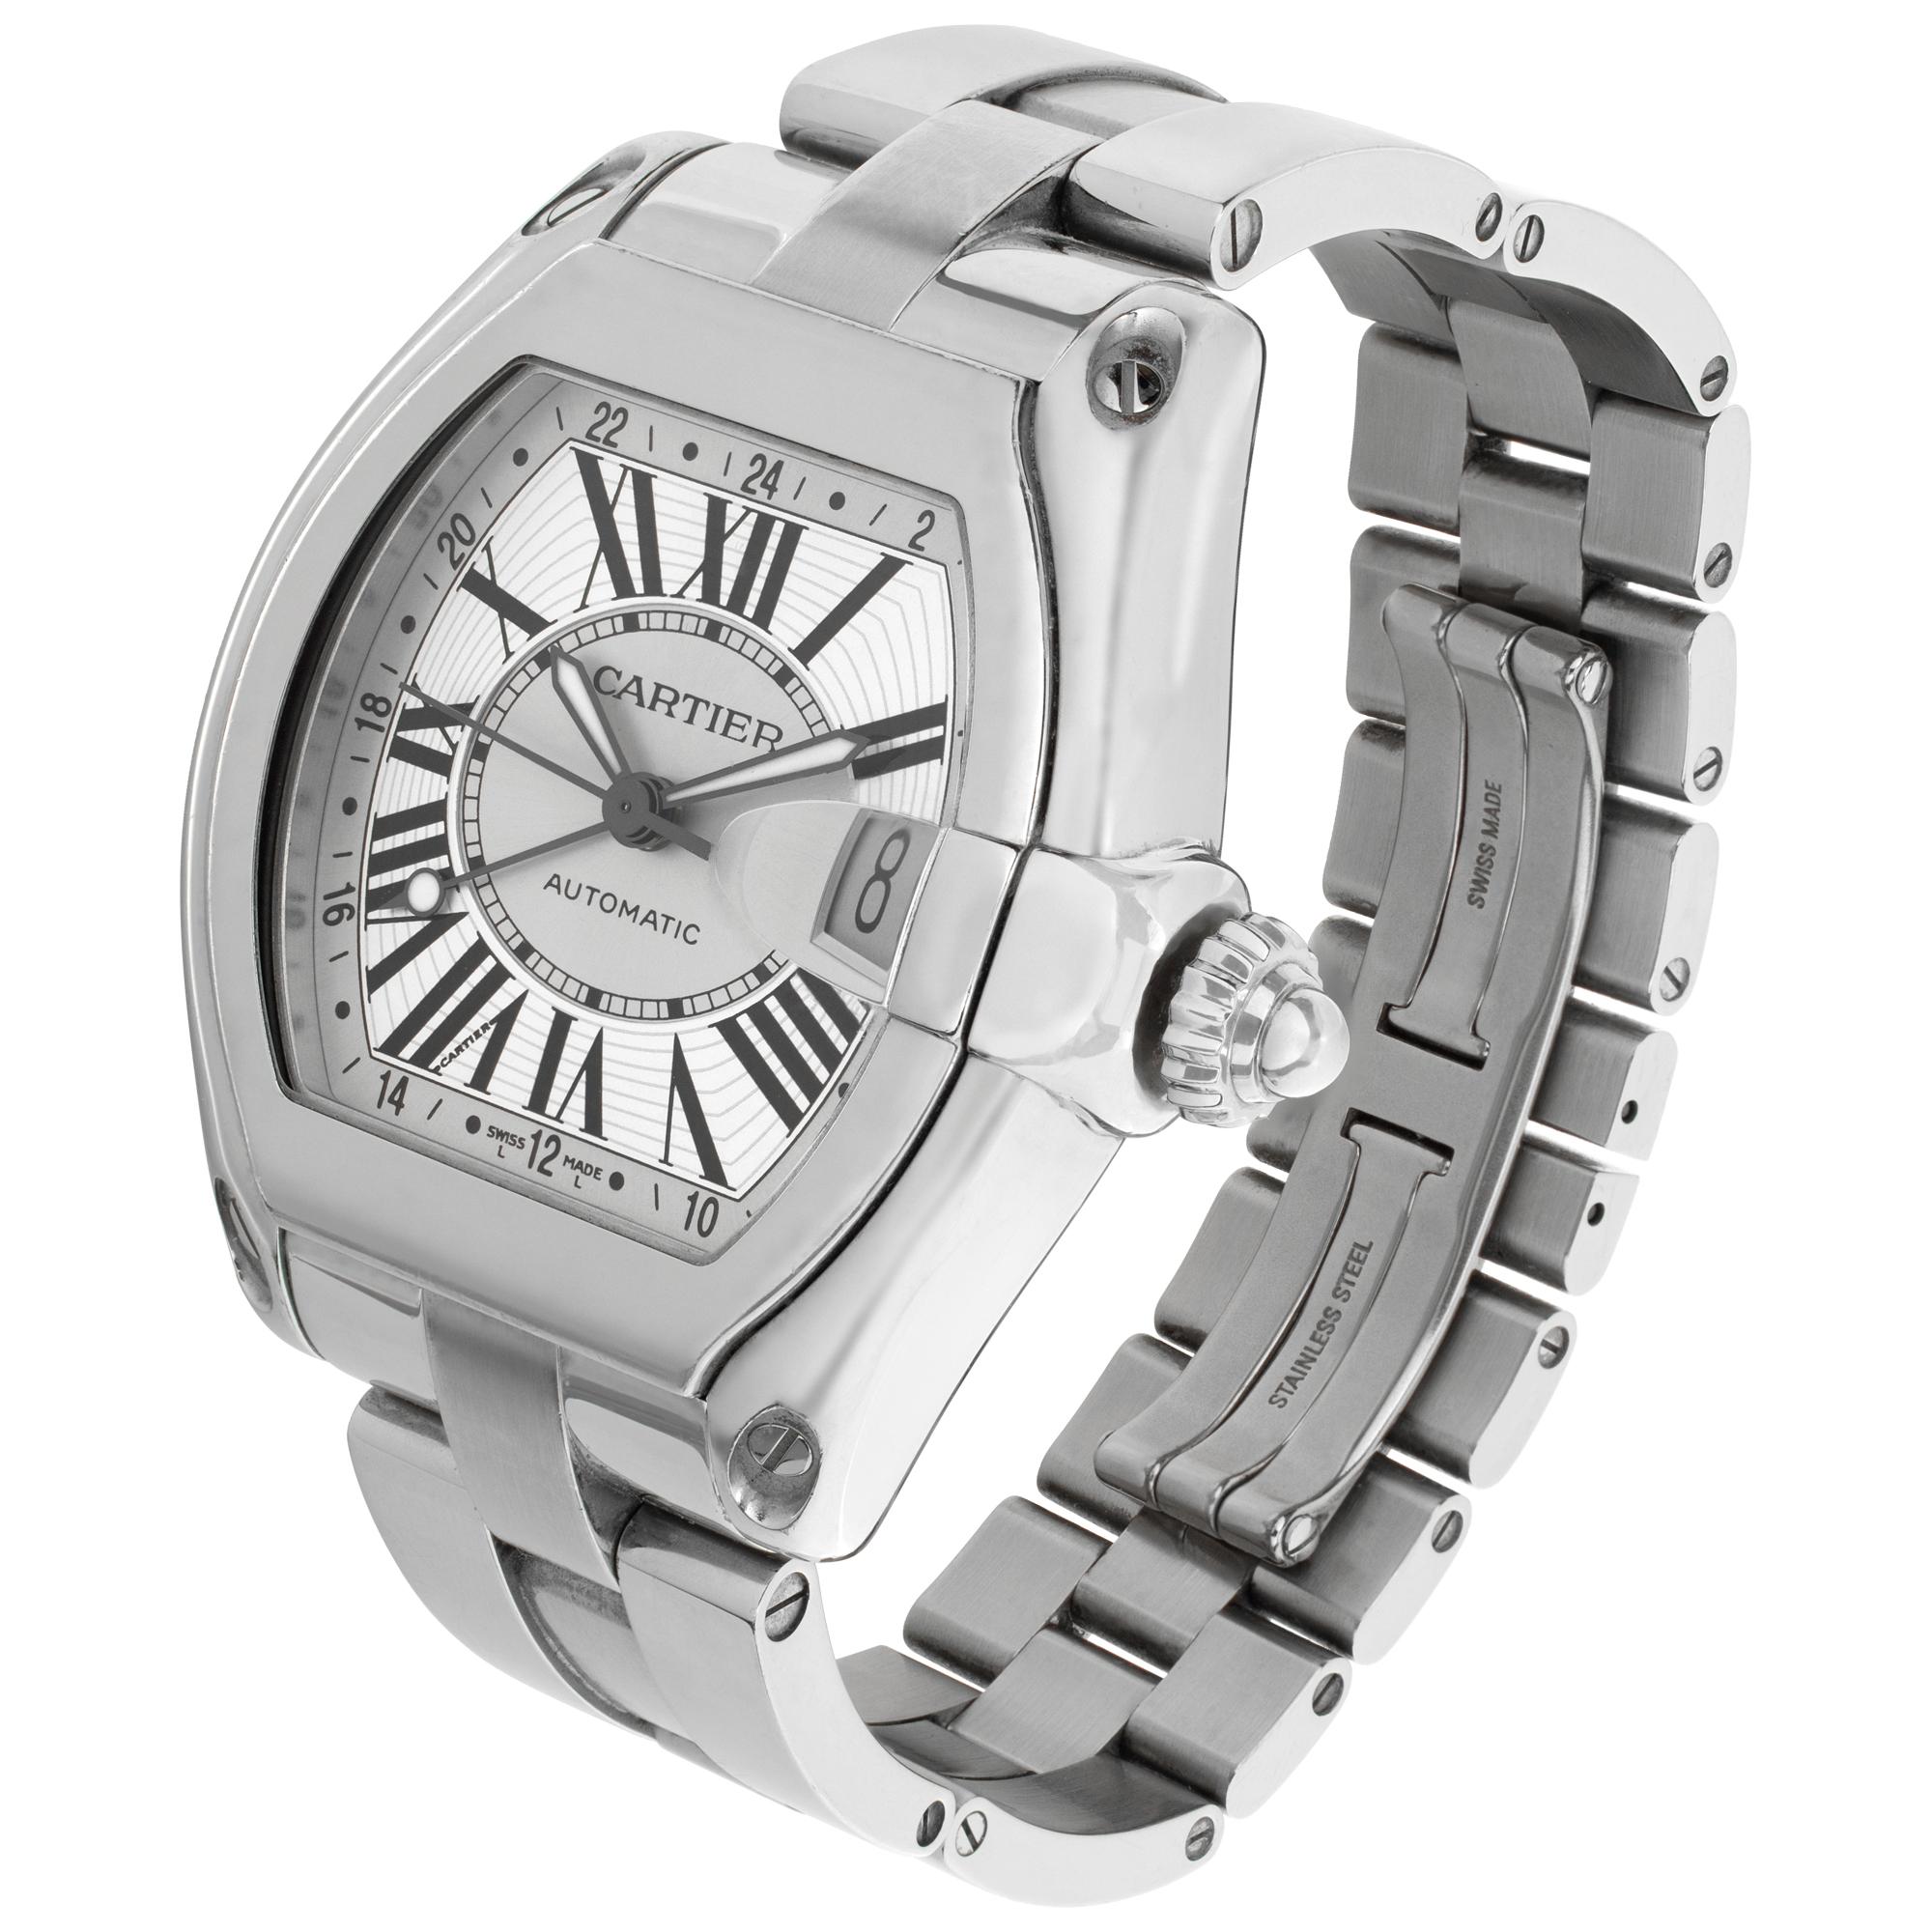 Cartier Roadster GMT in stainless steel. Auto w/ sweep seconds, date and dual time. 40 mm case size. Ref W62032X6. Circa 2000s. Fine Pre-owned Cartier Watch.

 Certified preowned Sport Cartier Roadster W62032X6 watch is made out of Stainless steel